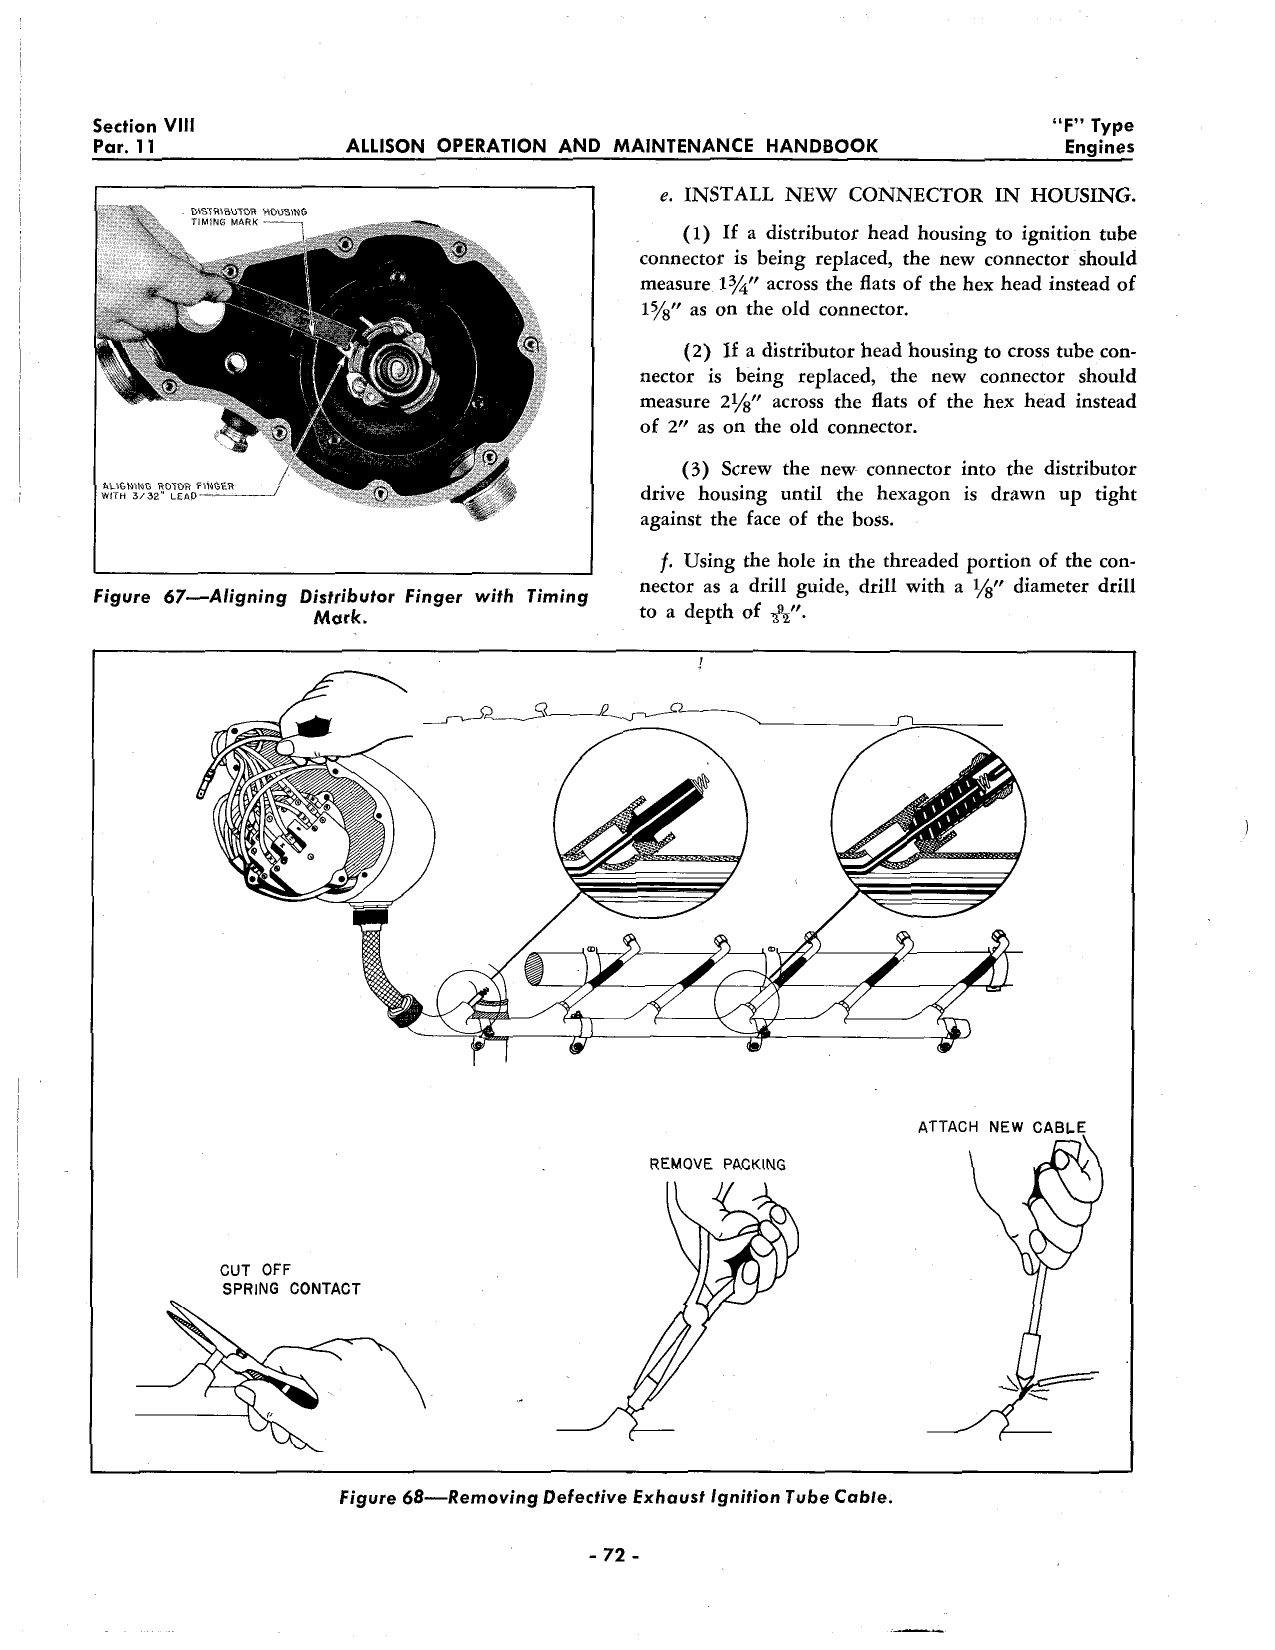 Sample page 93 from AirCorps Library document: Operation & Maintenance - Allison V-1710-F Engines